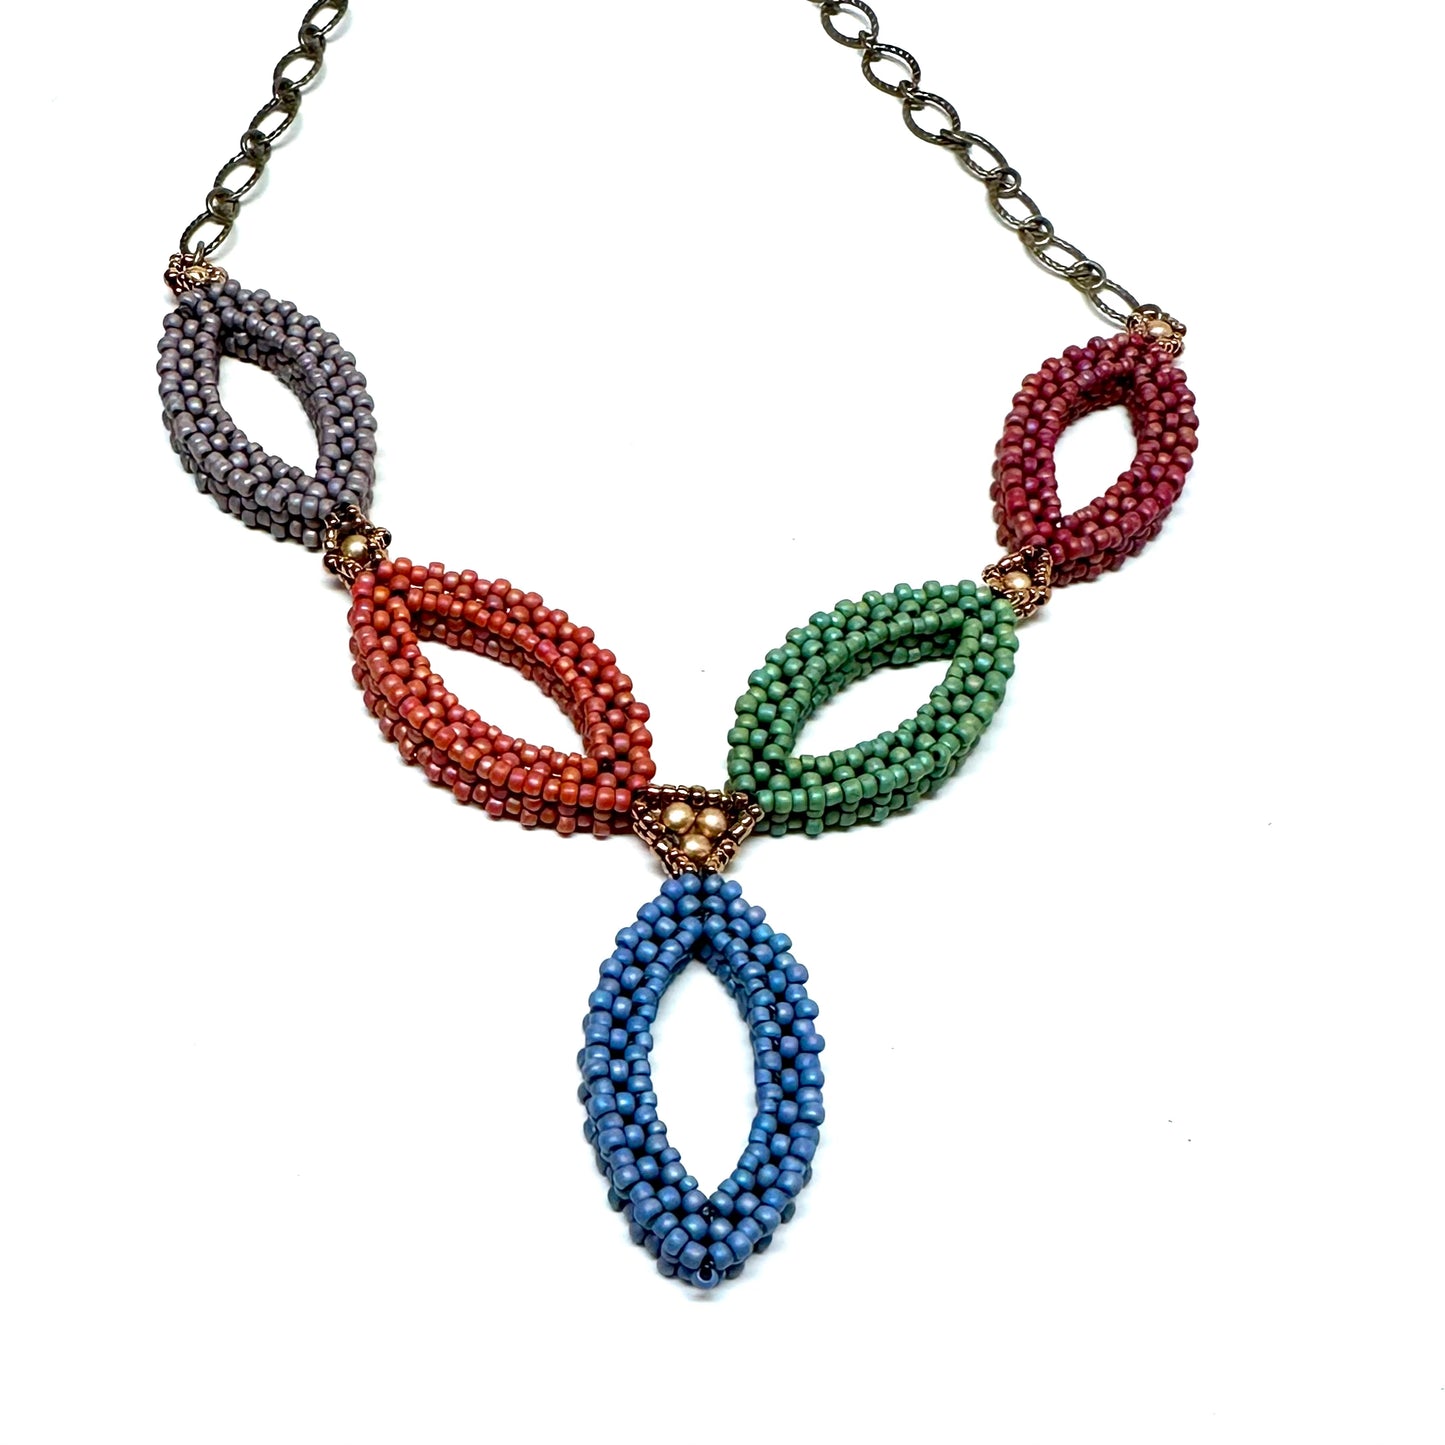 Hojas Necklace - 5 Multi Colored Leaves